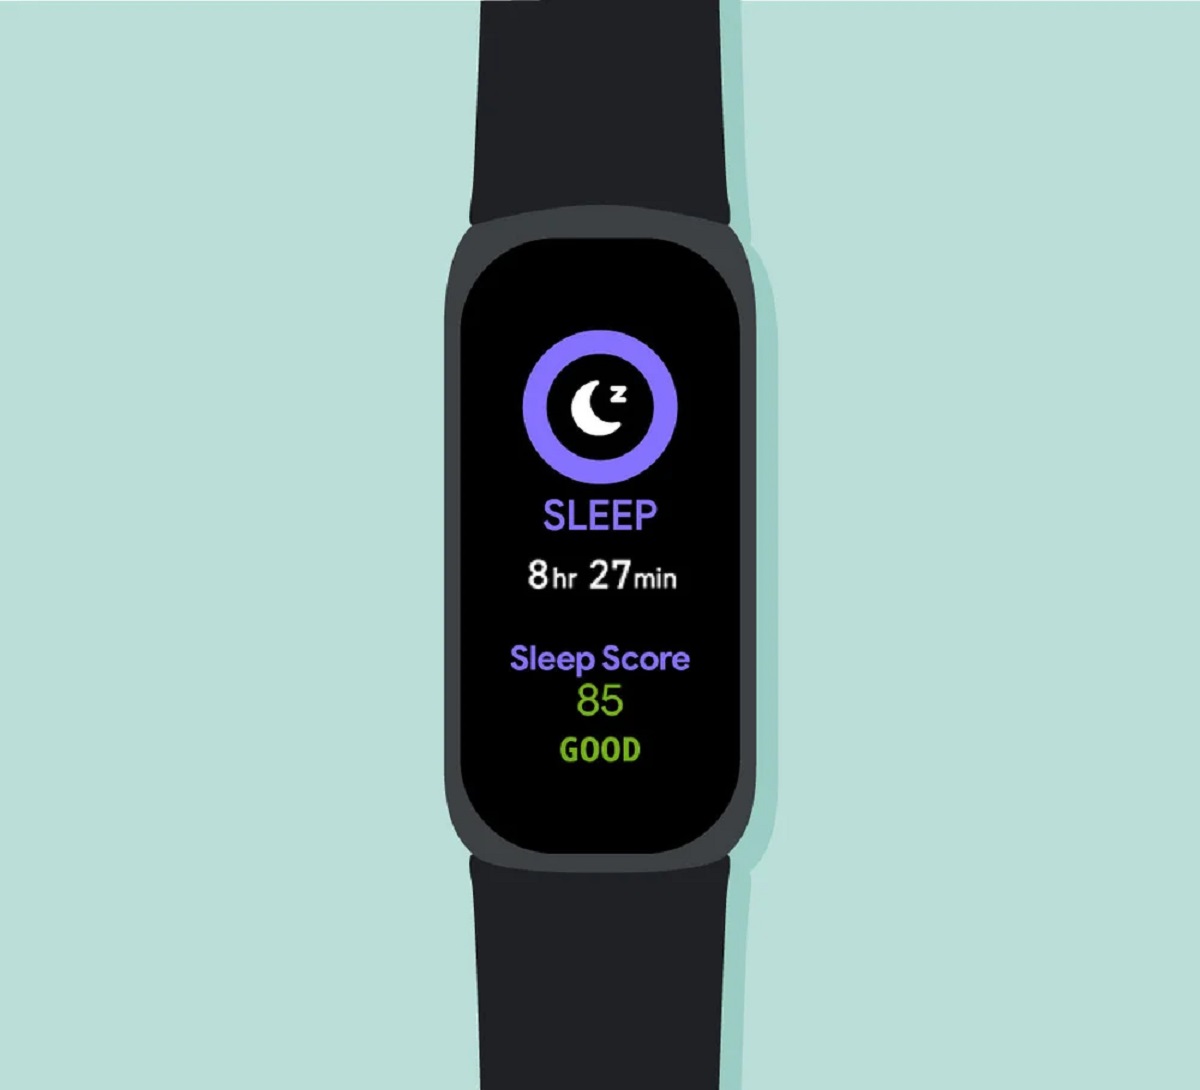 sleep-score-snags-troubleshooting-issues-with-fitbit-sleep-score